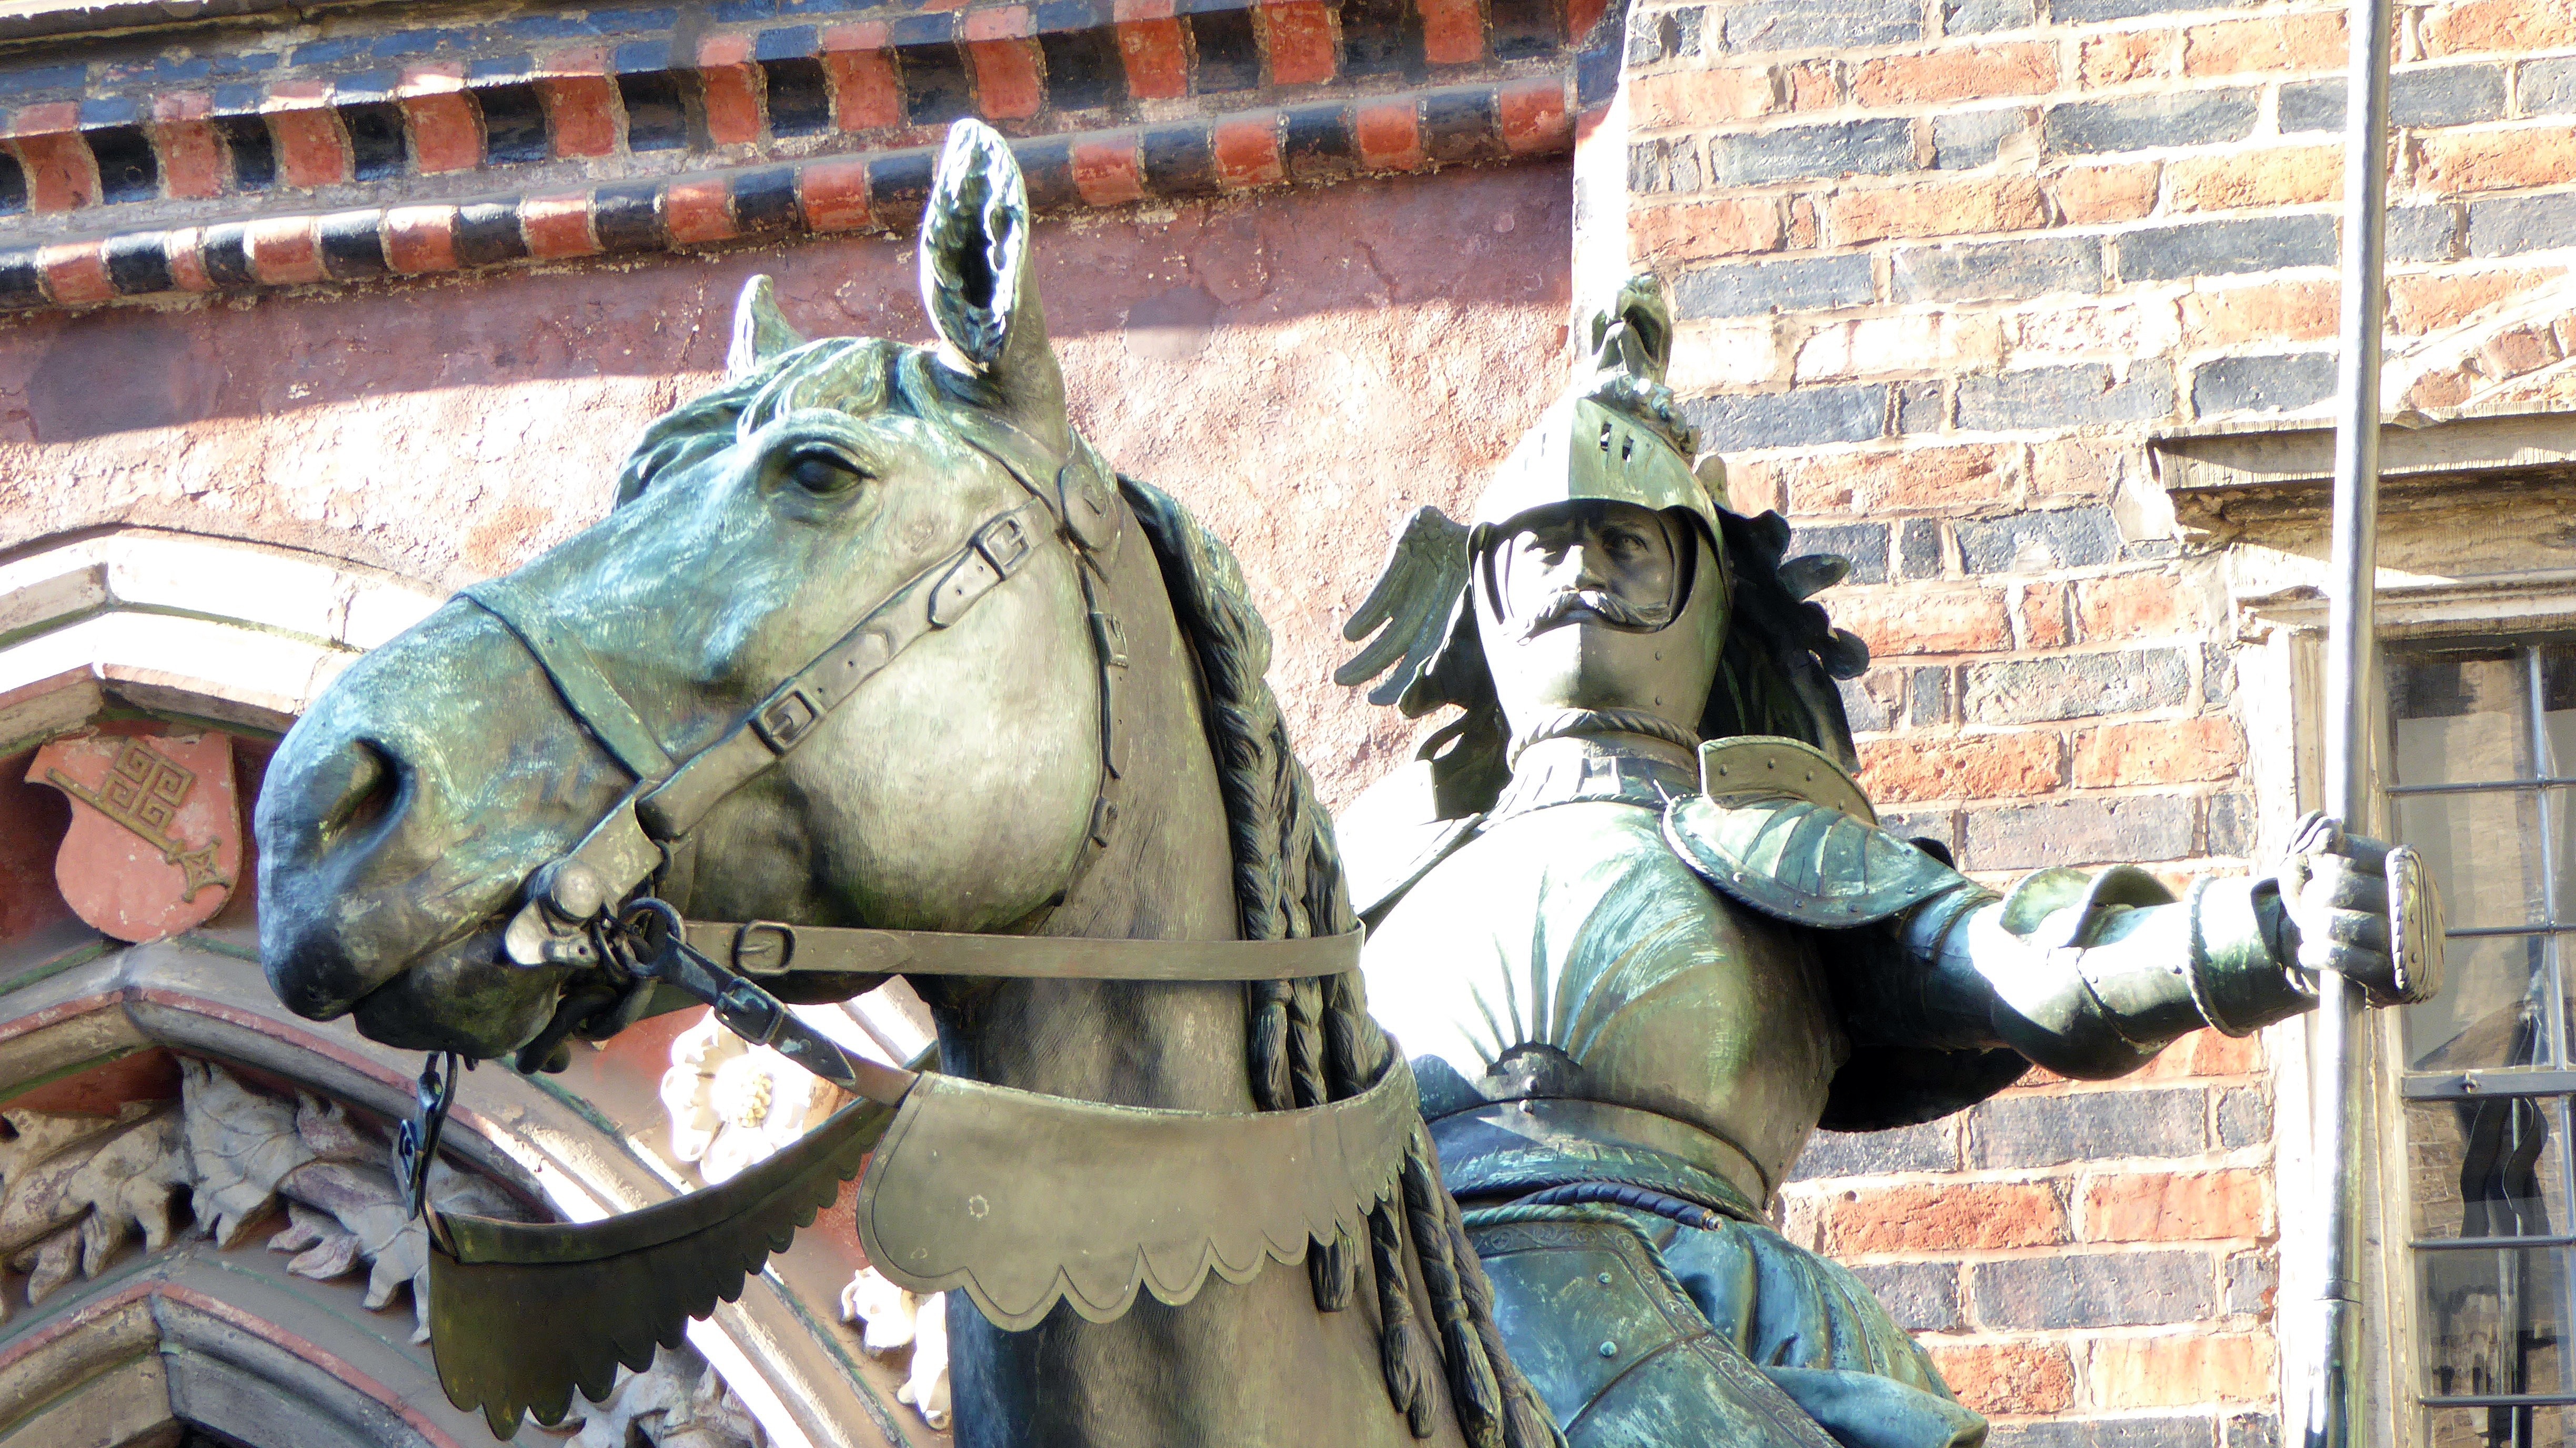 armored man riding a horse statue